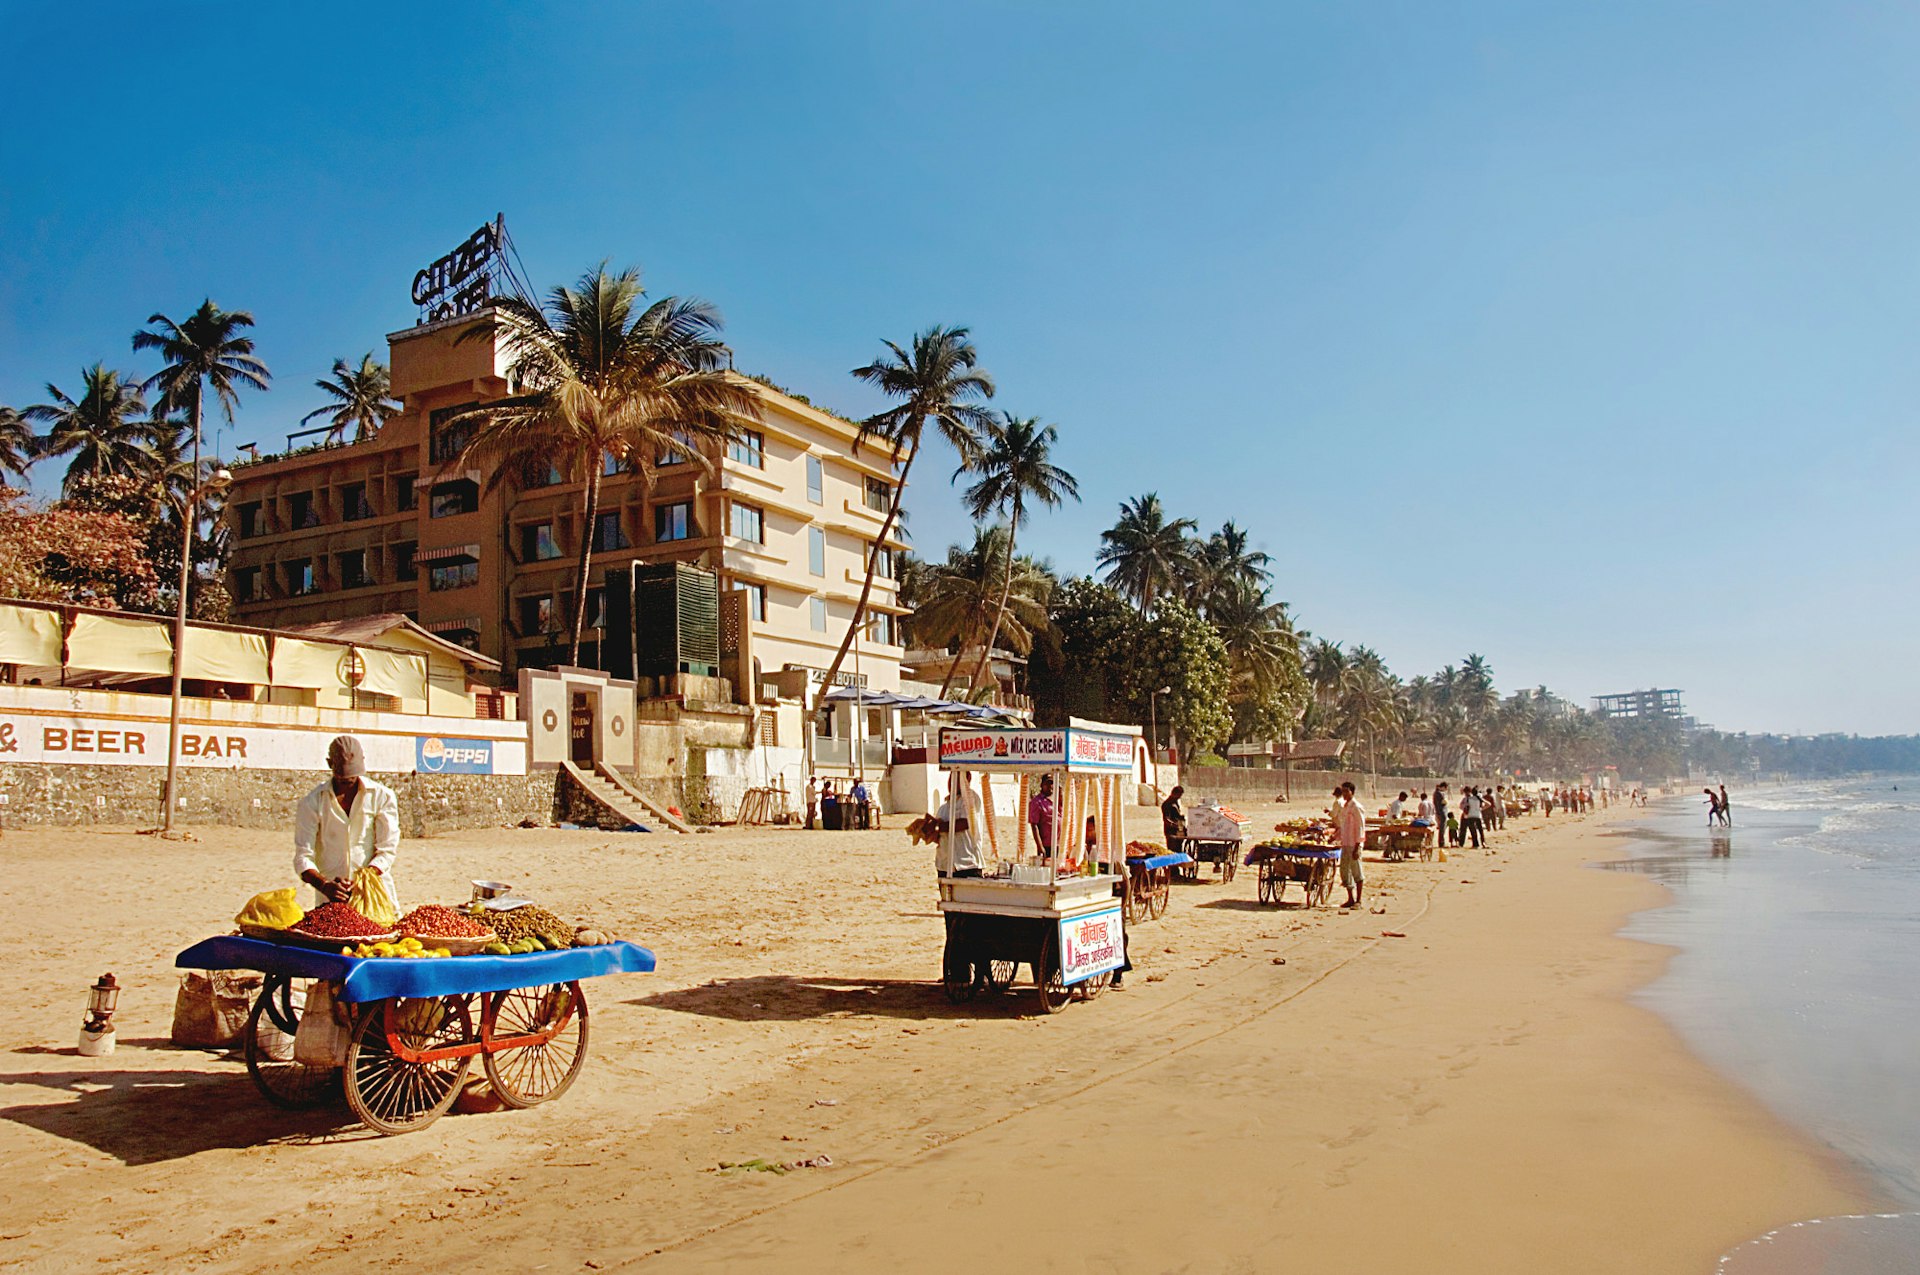 Juhu Beach is a prime location for Bollywood song and dance numbers © Joe Lasky / Getty Images